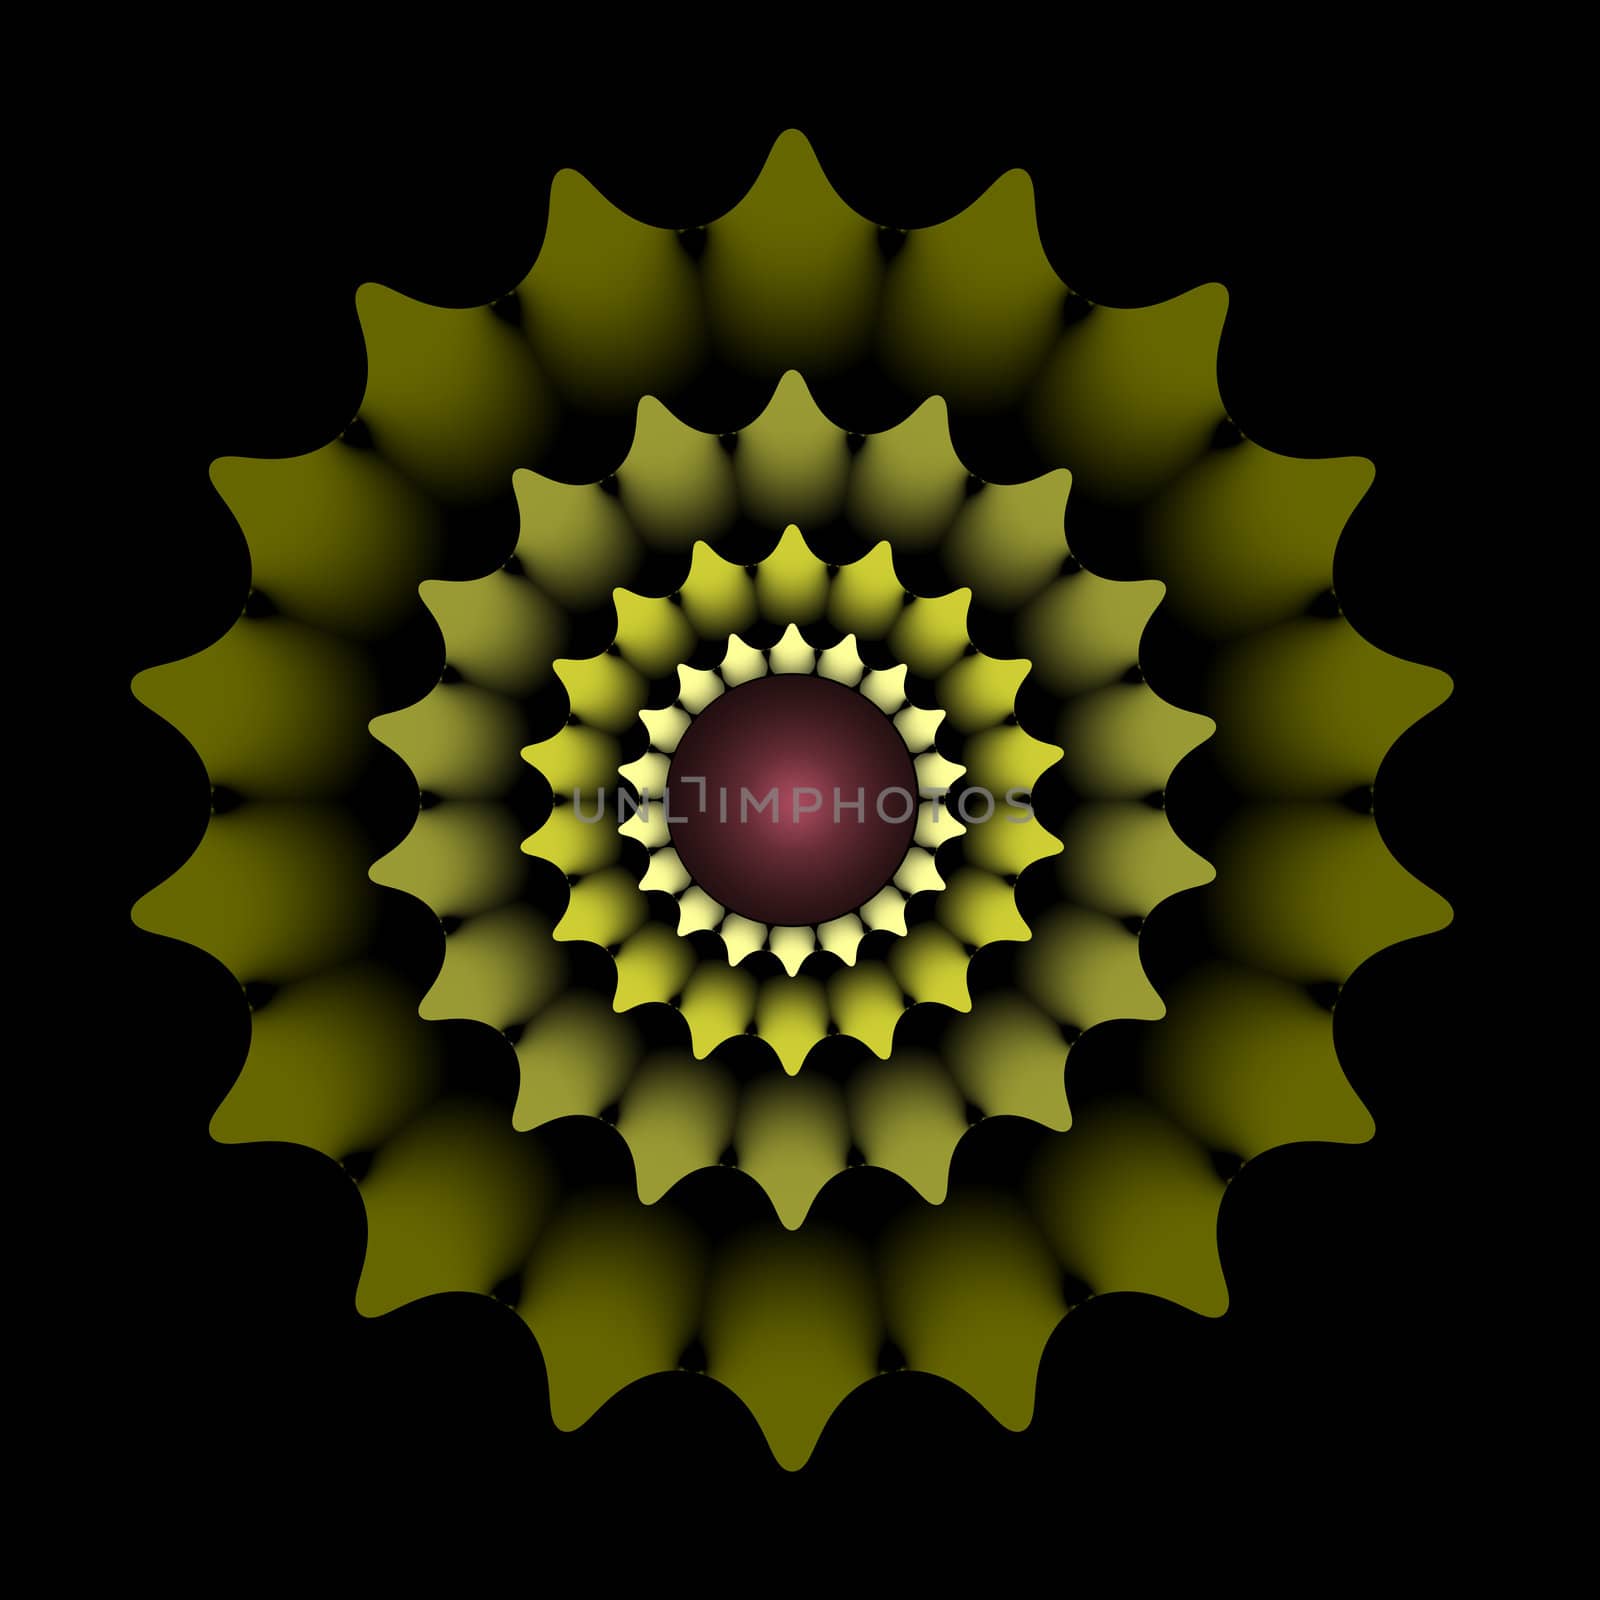 Shades of green stylized leaf shapes arranged in concentric circles of a fractal with a burgundy center bubble.